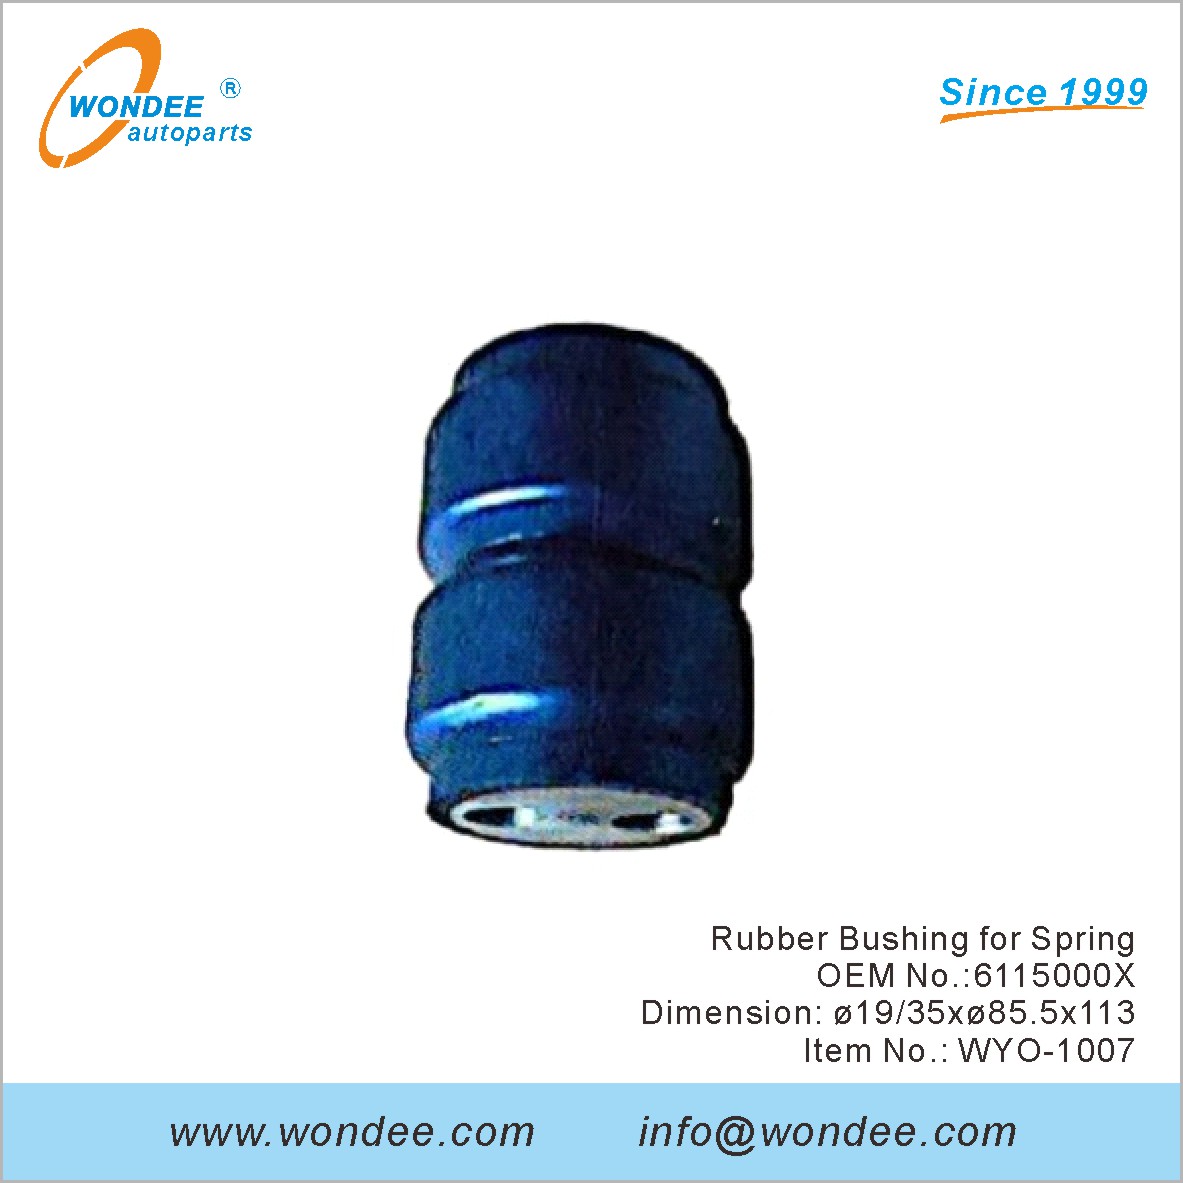 Rubber Bushing for Spring OEM 6115000X for Volvo from WONDEE